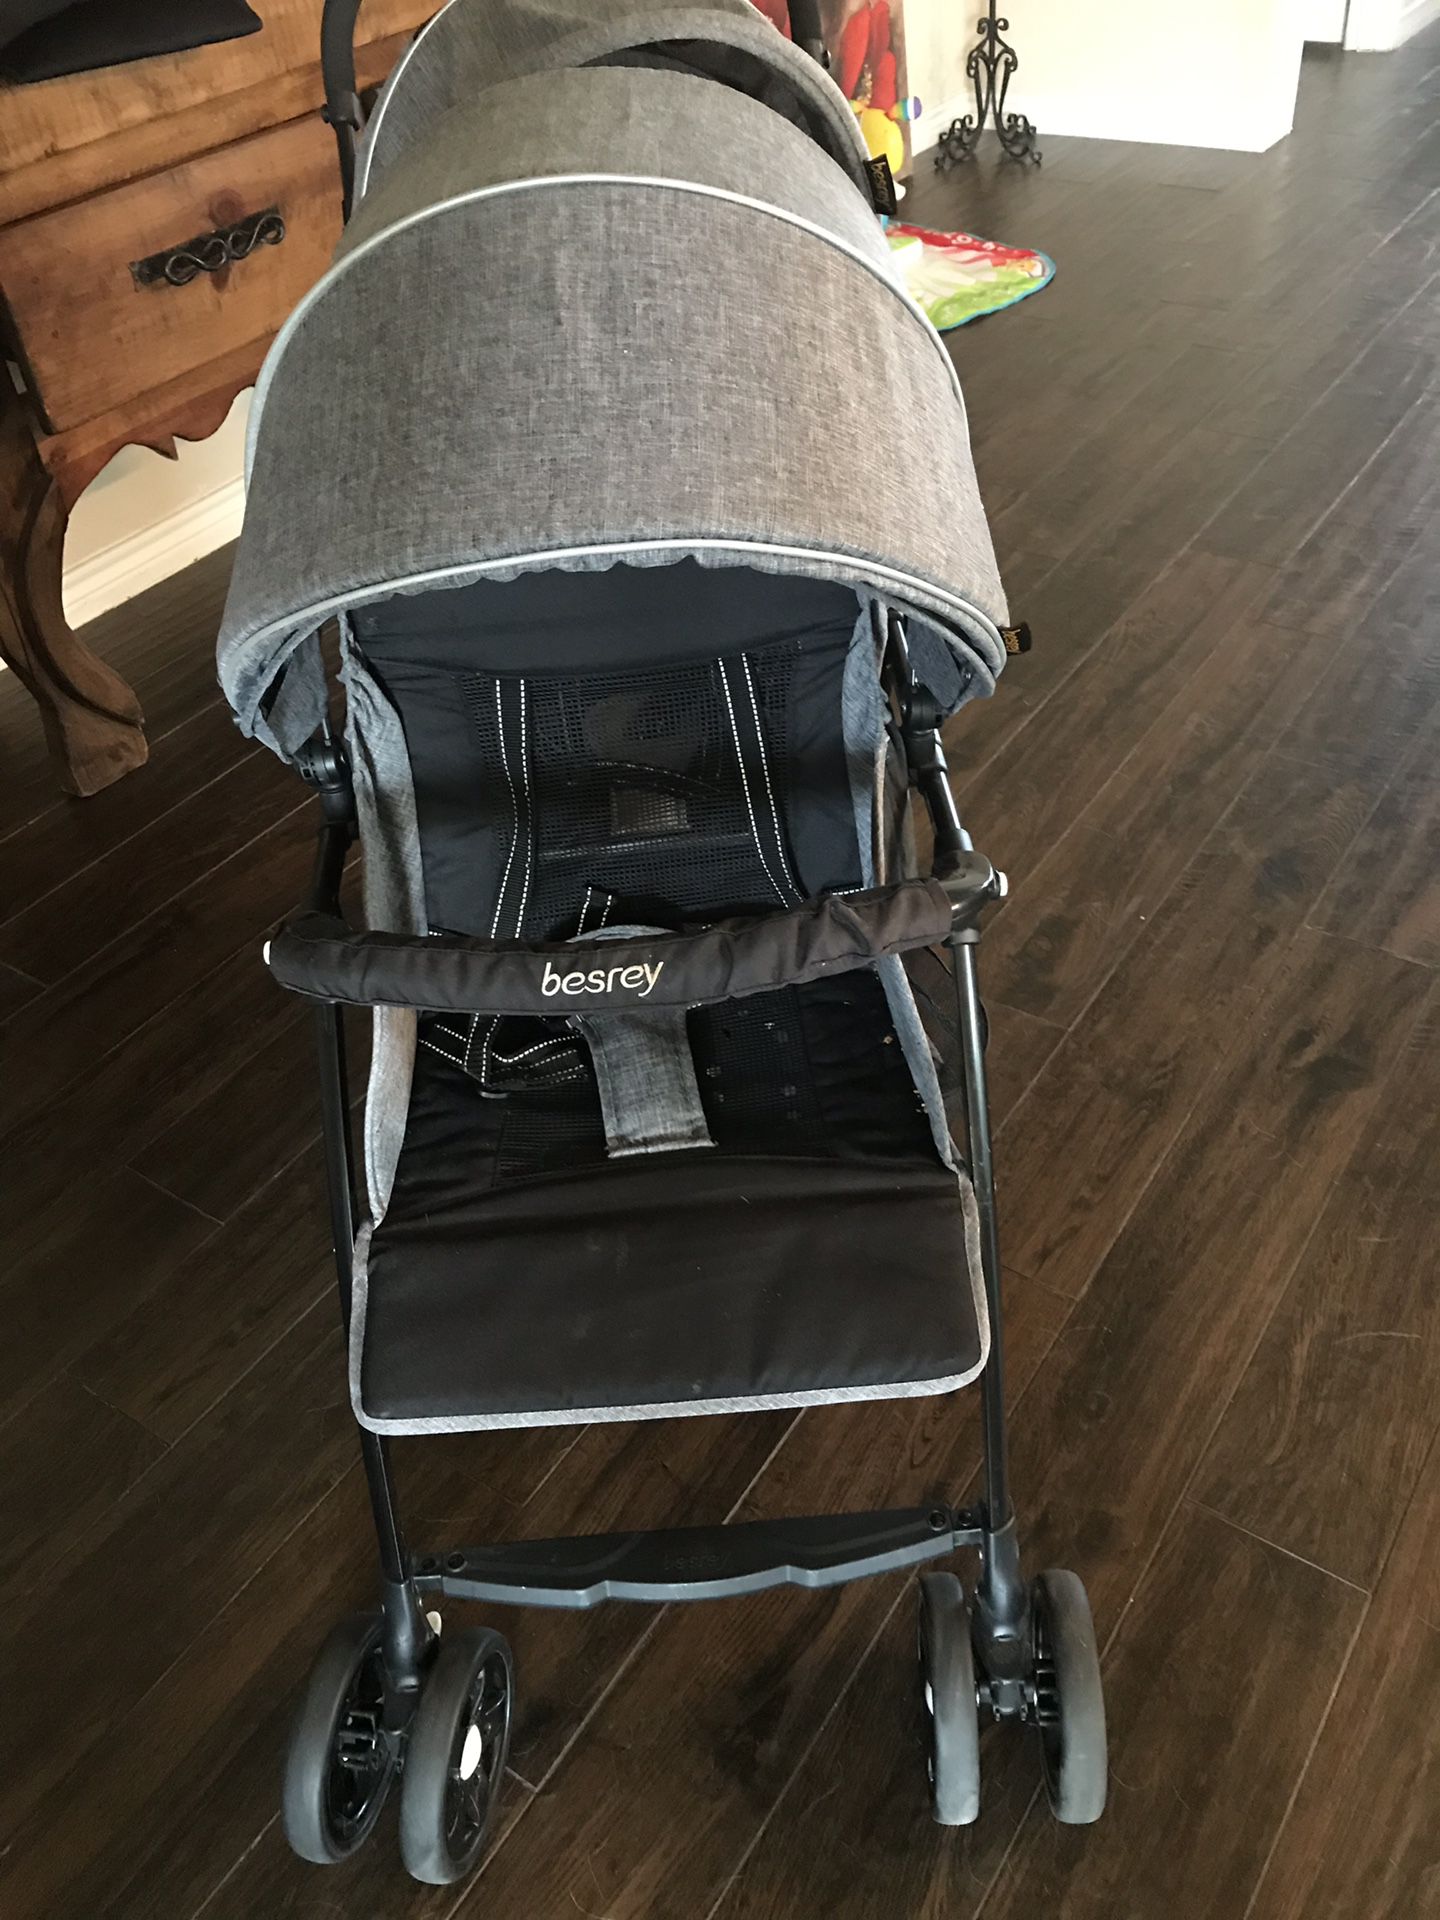 Besray double stroller